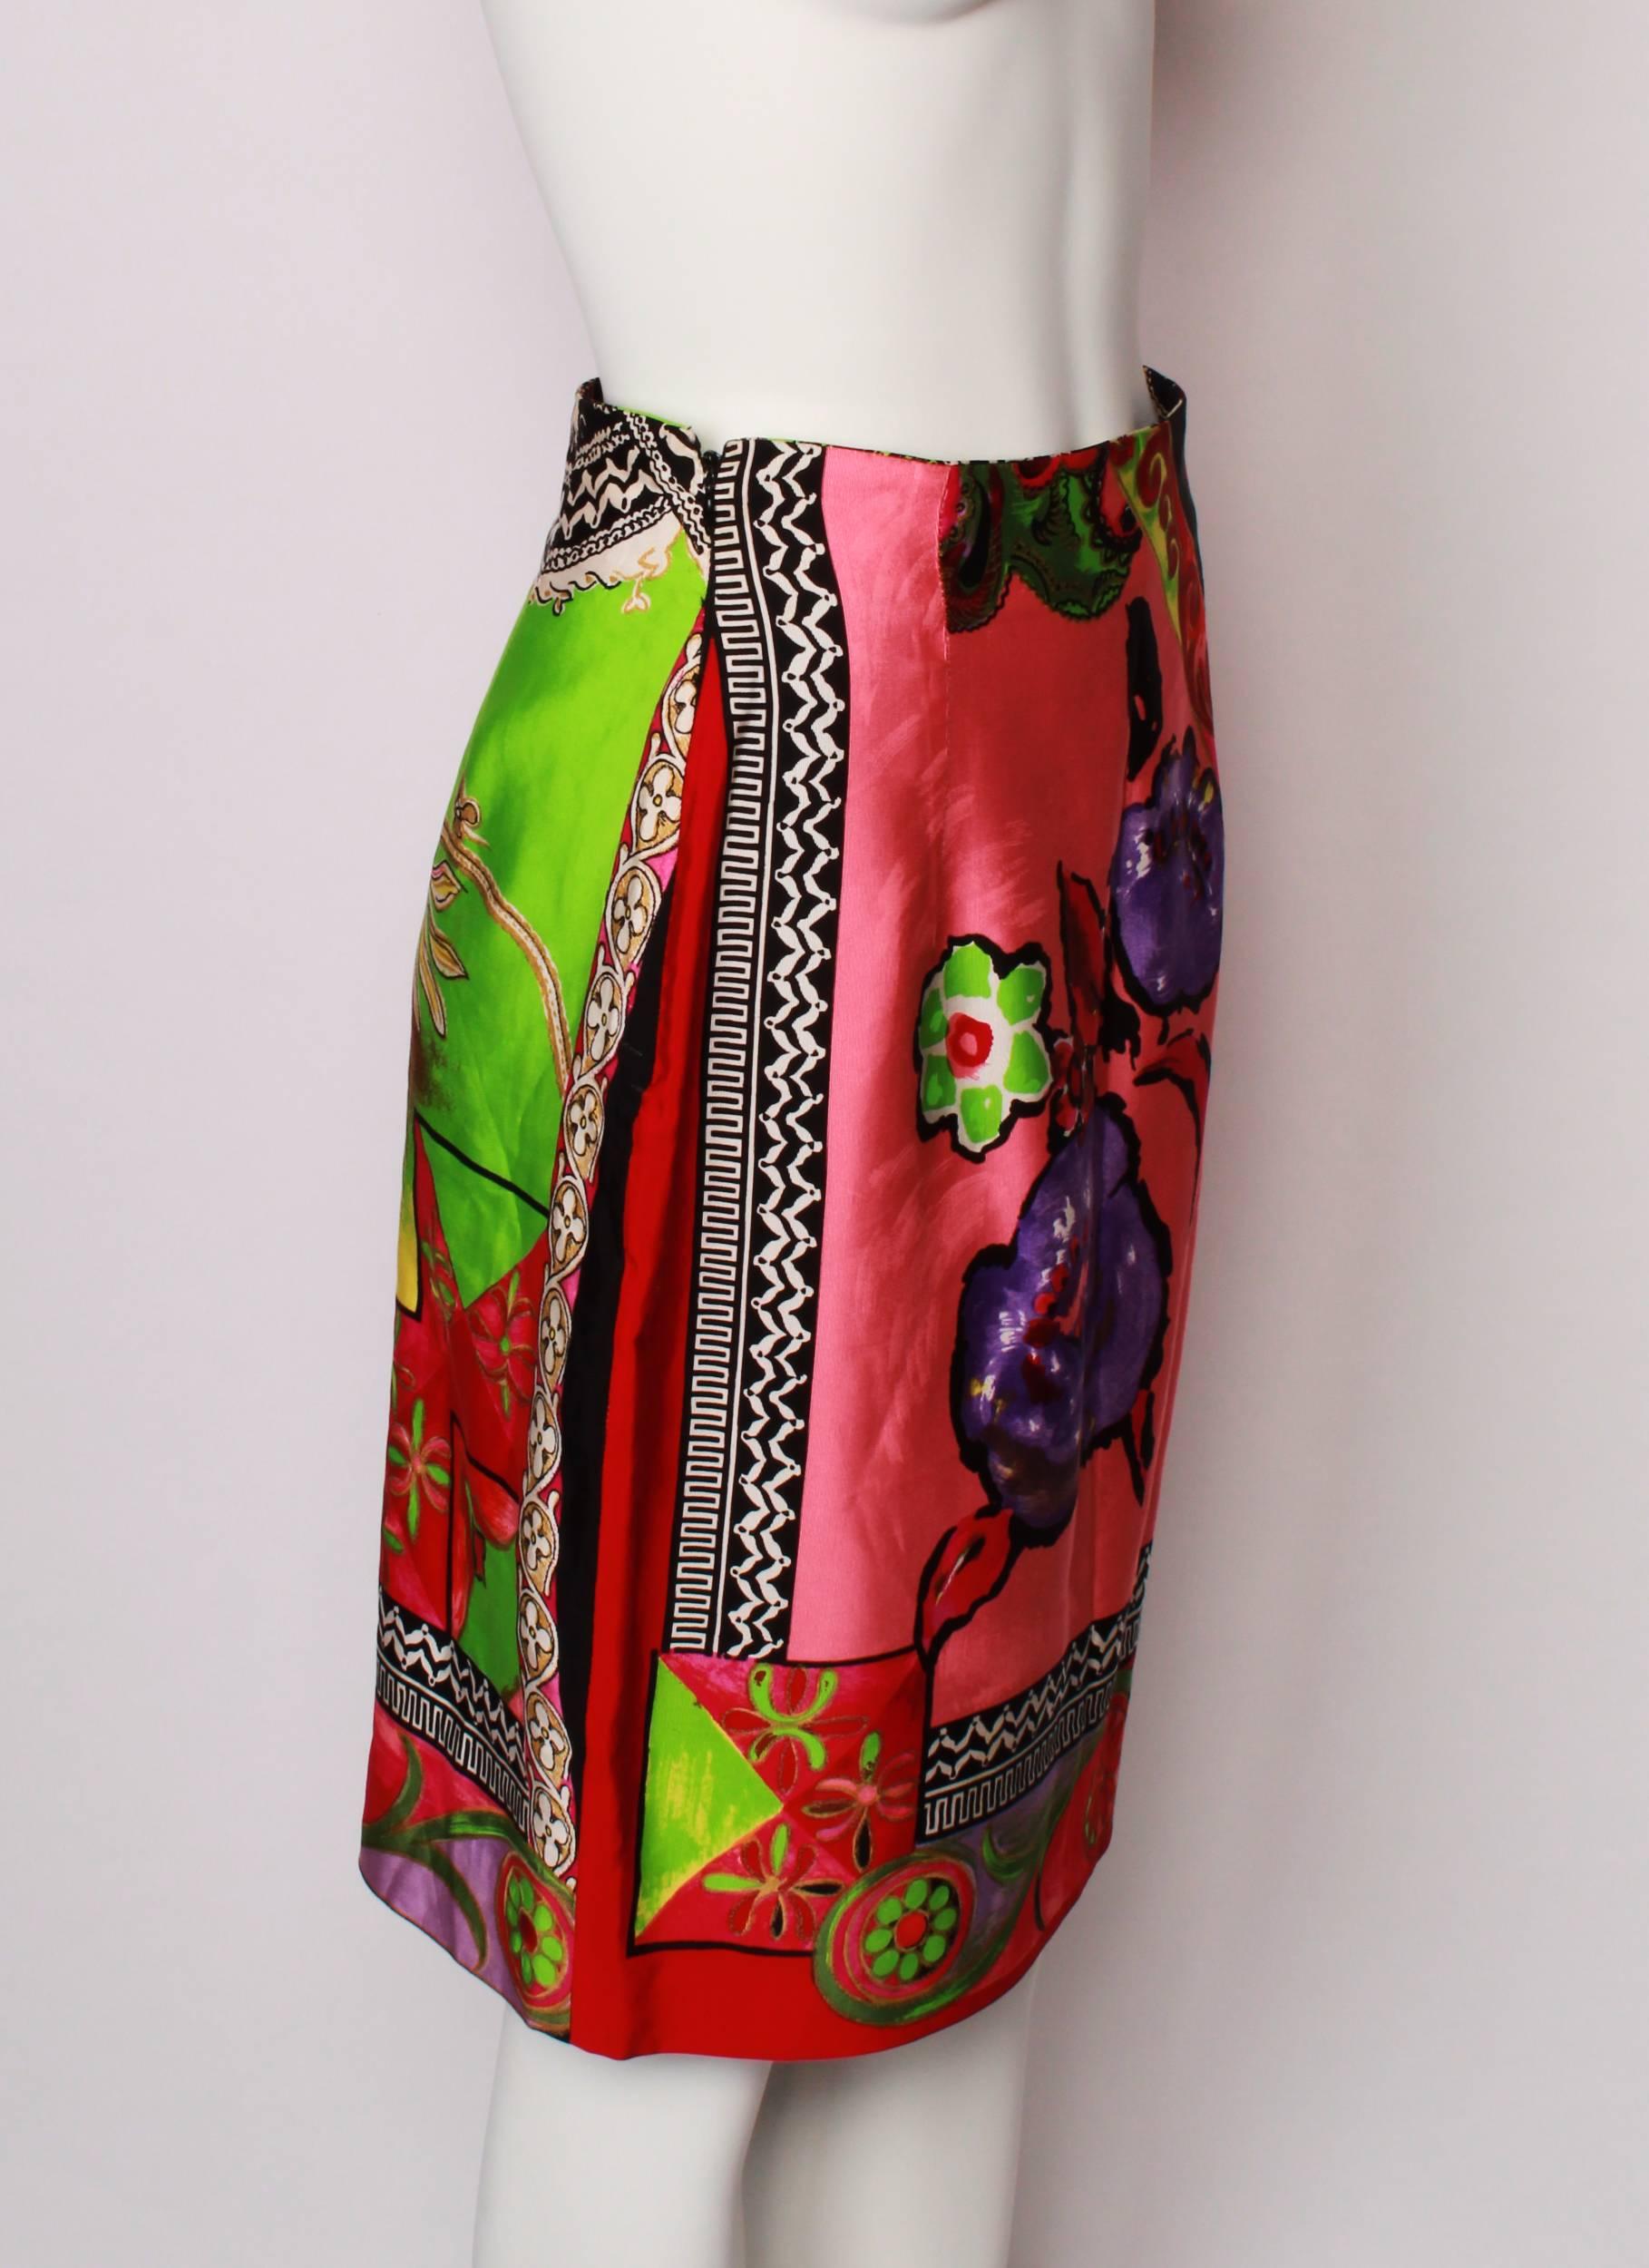 Iconic floral and grecian print Gianni Versace skirt.
55% Viscose rayon
45% Cotton
Fully Lined.
Dry Clean Only